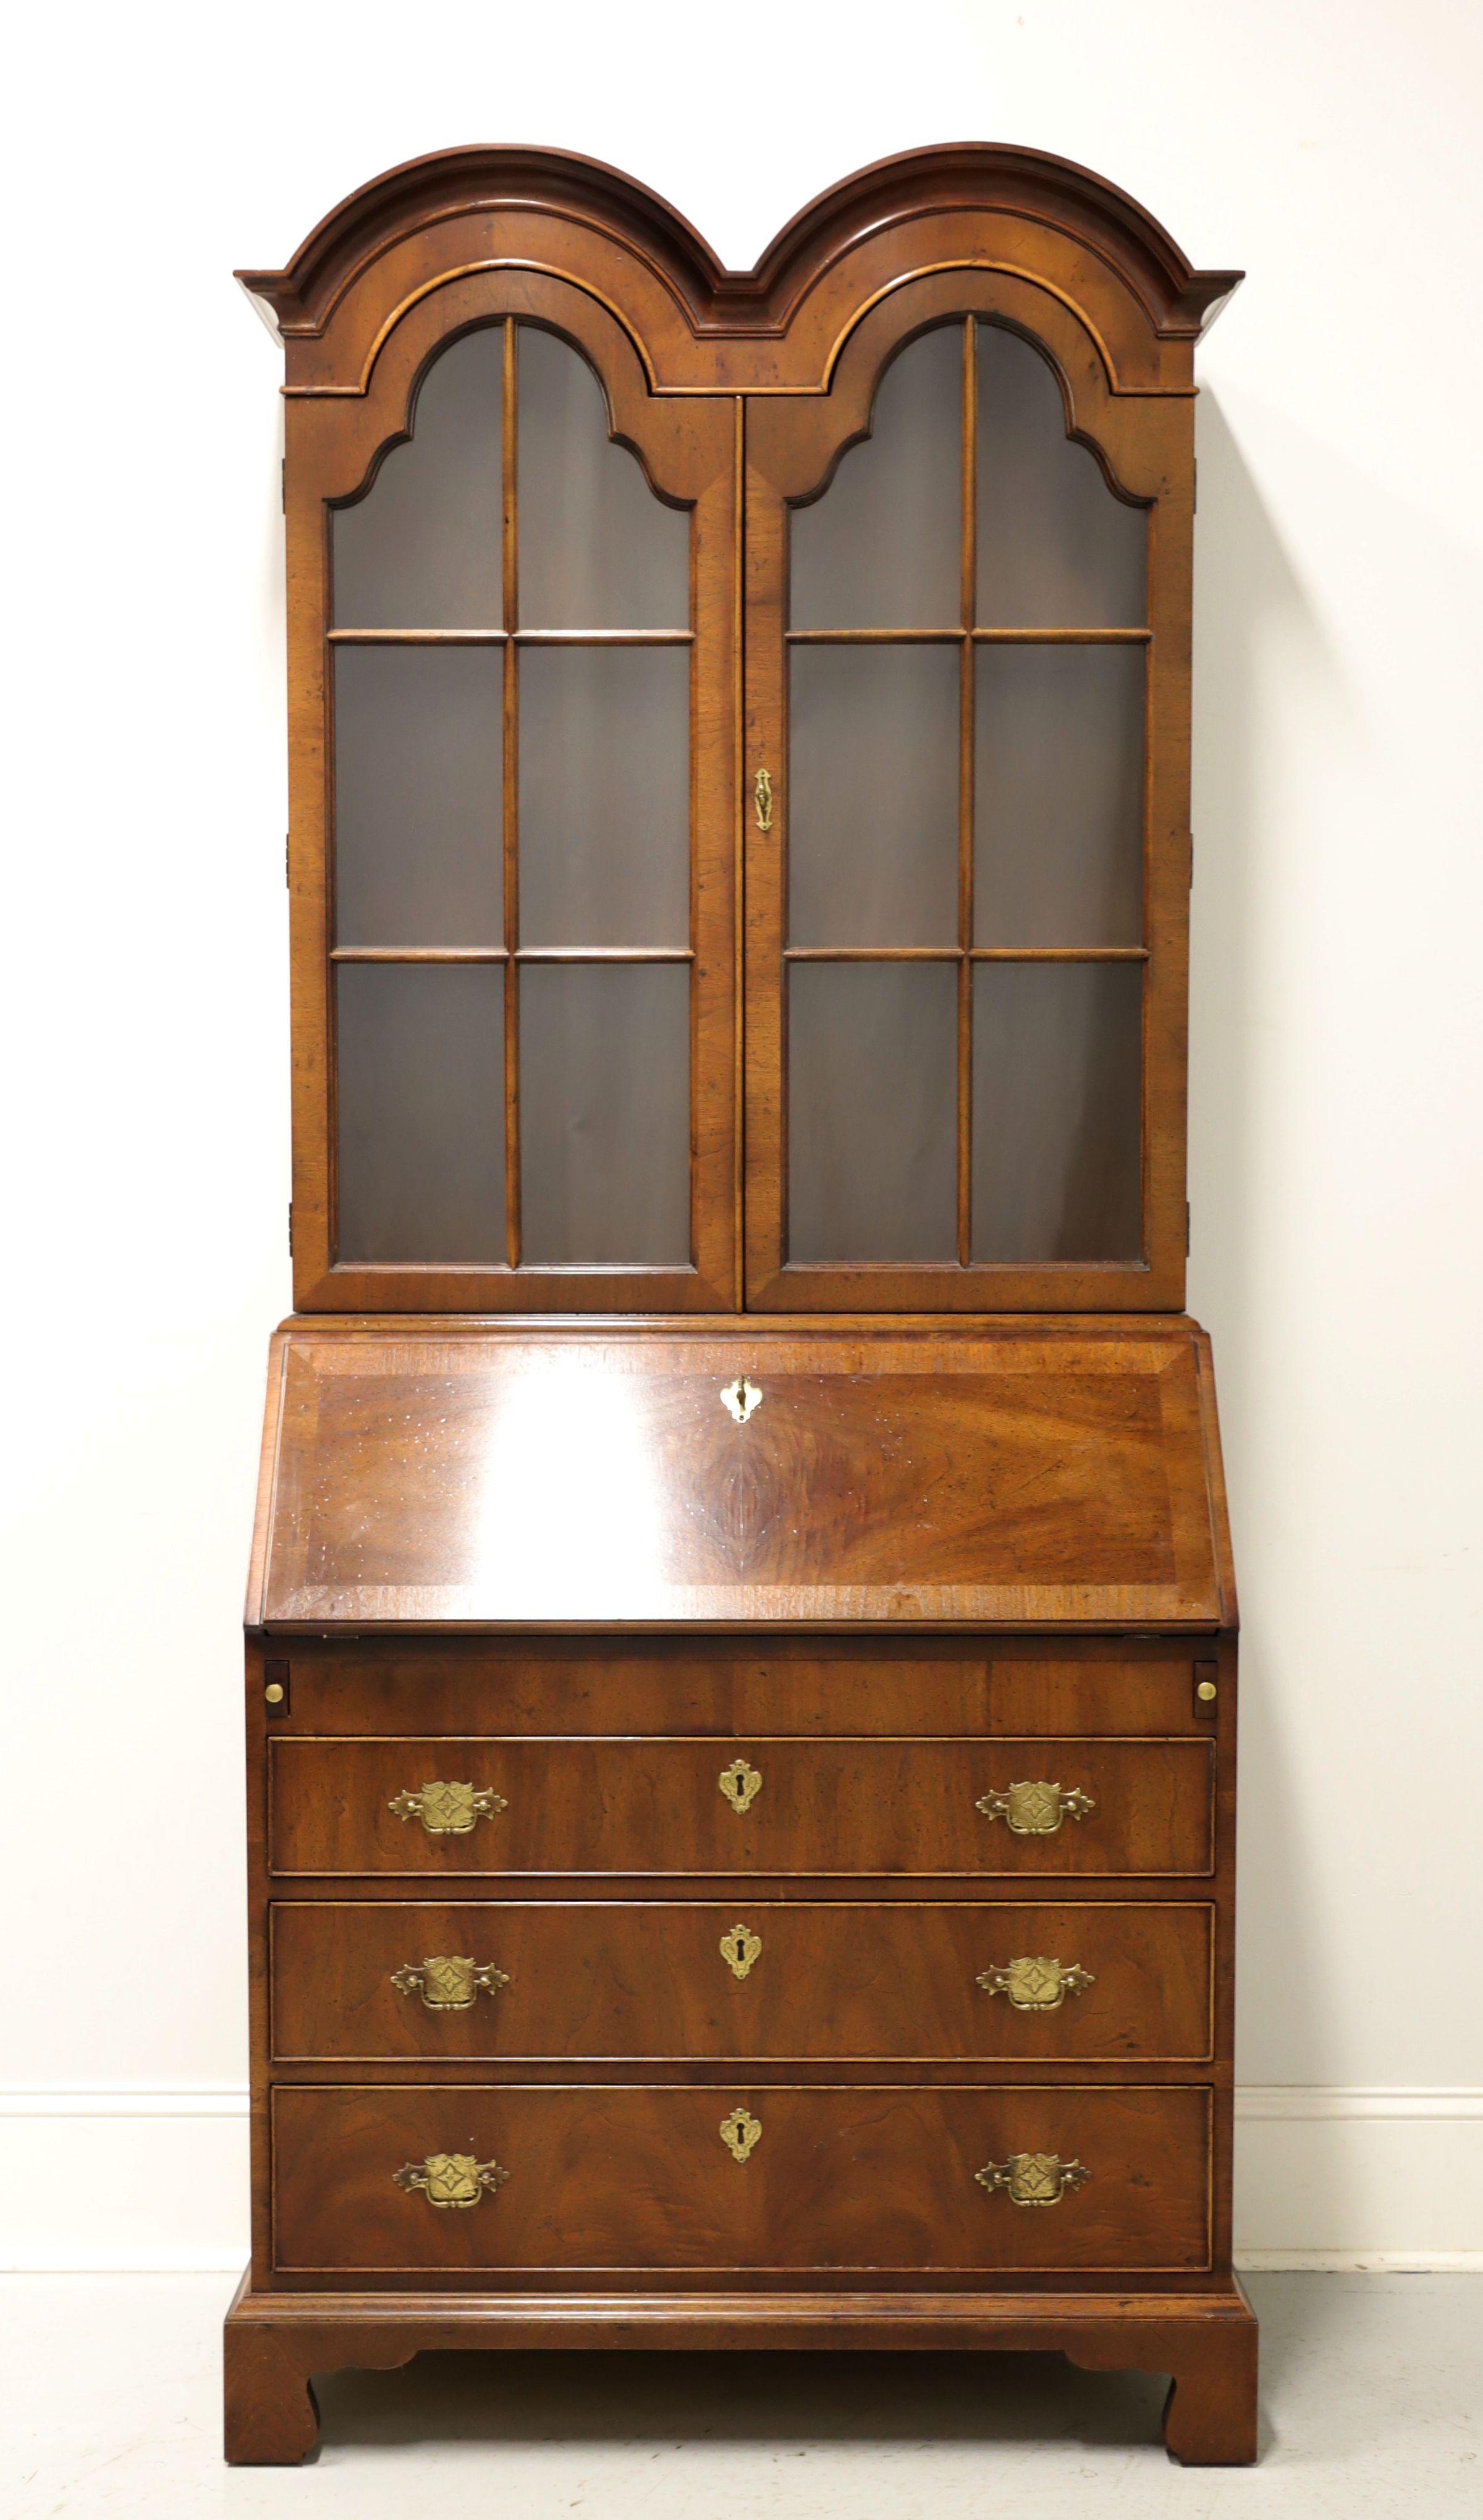 A Chippendale style secretary desk by Henredon, from their Folio 10 Collection. Walnut with brass hardware, double bonnet top, crown moulding, banded desk front and bracket feet. Upper cabinet features two arched doors with paned glass revealing two